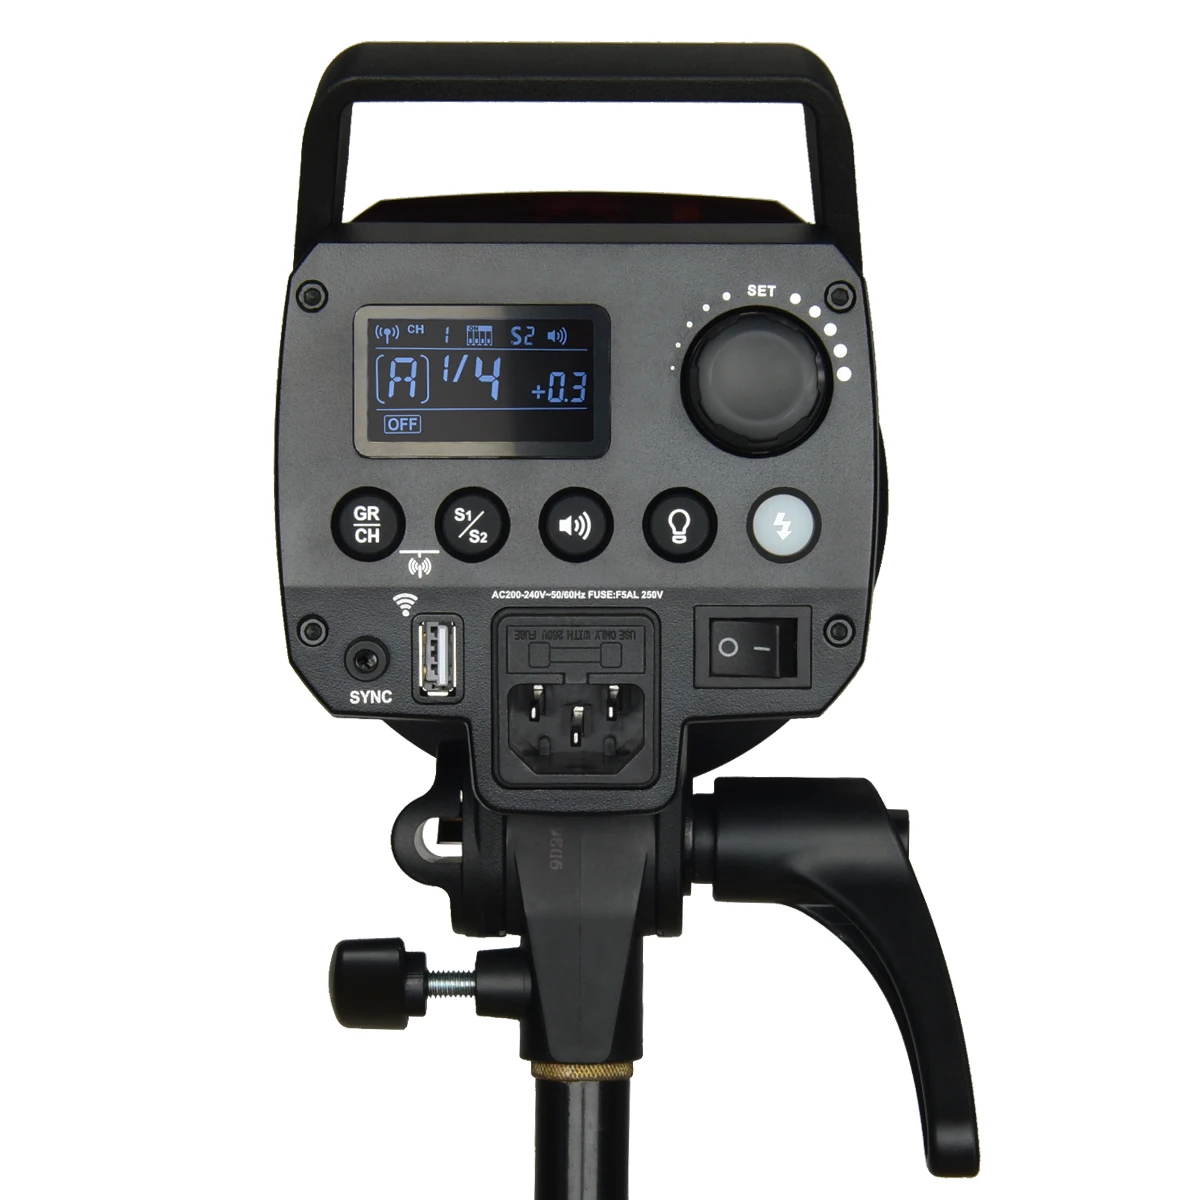 Godox MS300 300W 2.4G Built-in Wireless Receiver Lightweight Compact and Durable Bowens Mount Studio Flash